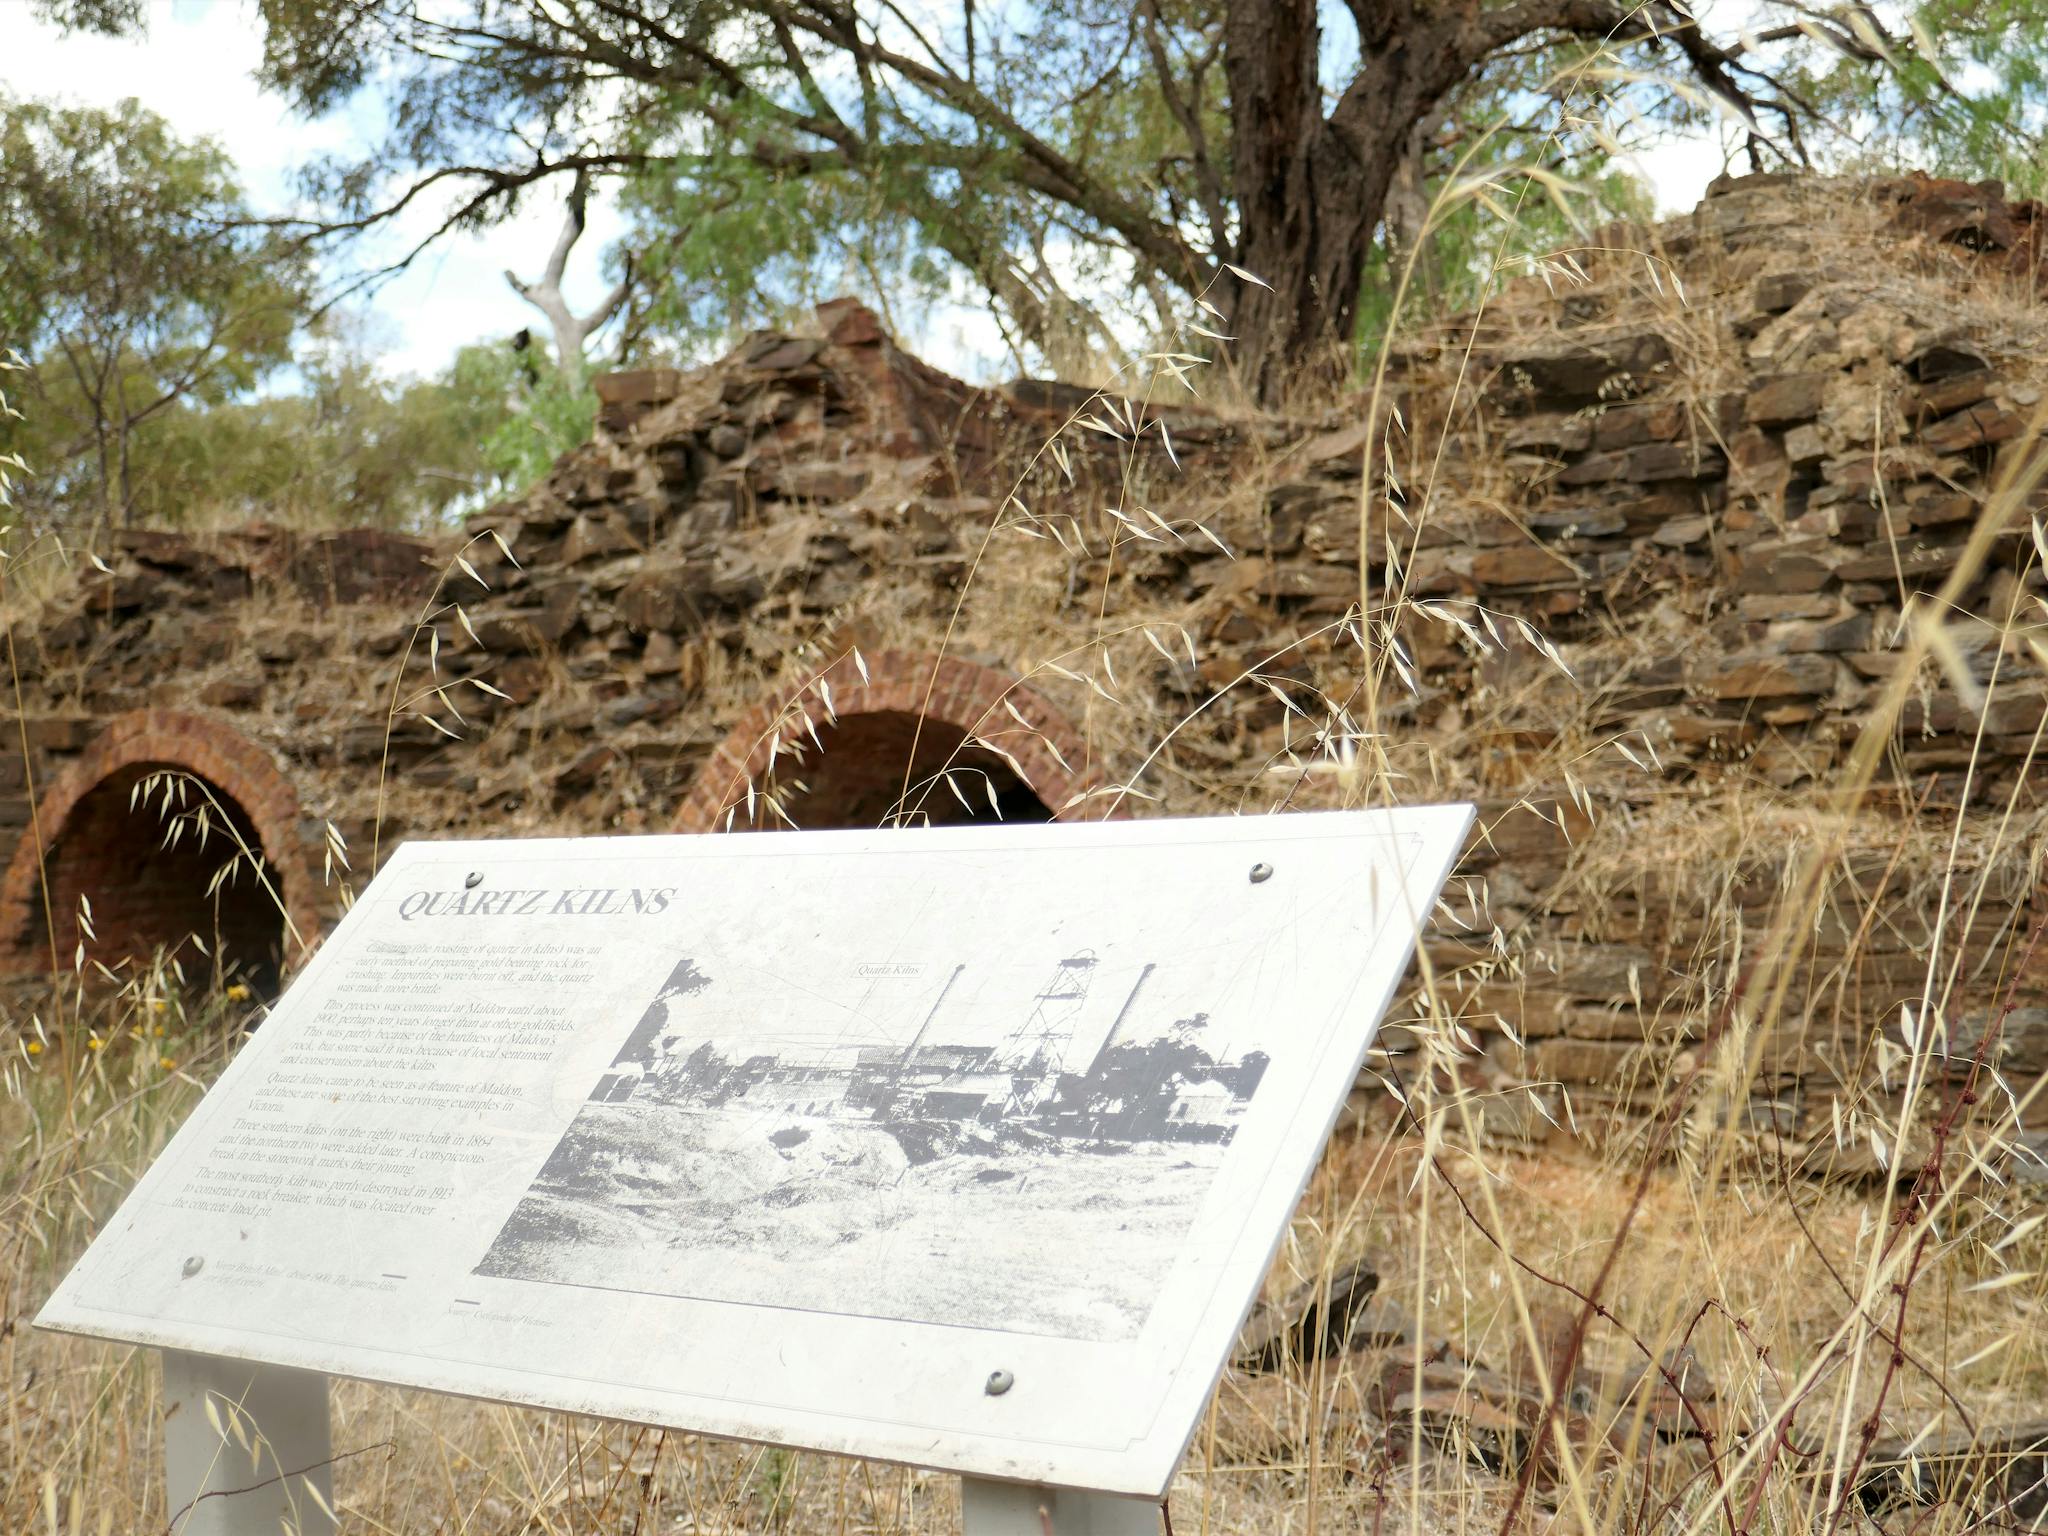 Learning about the rich Goldfields history: Maldon